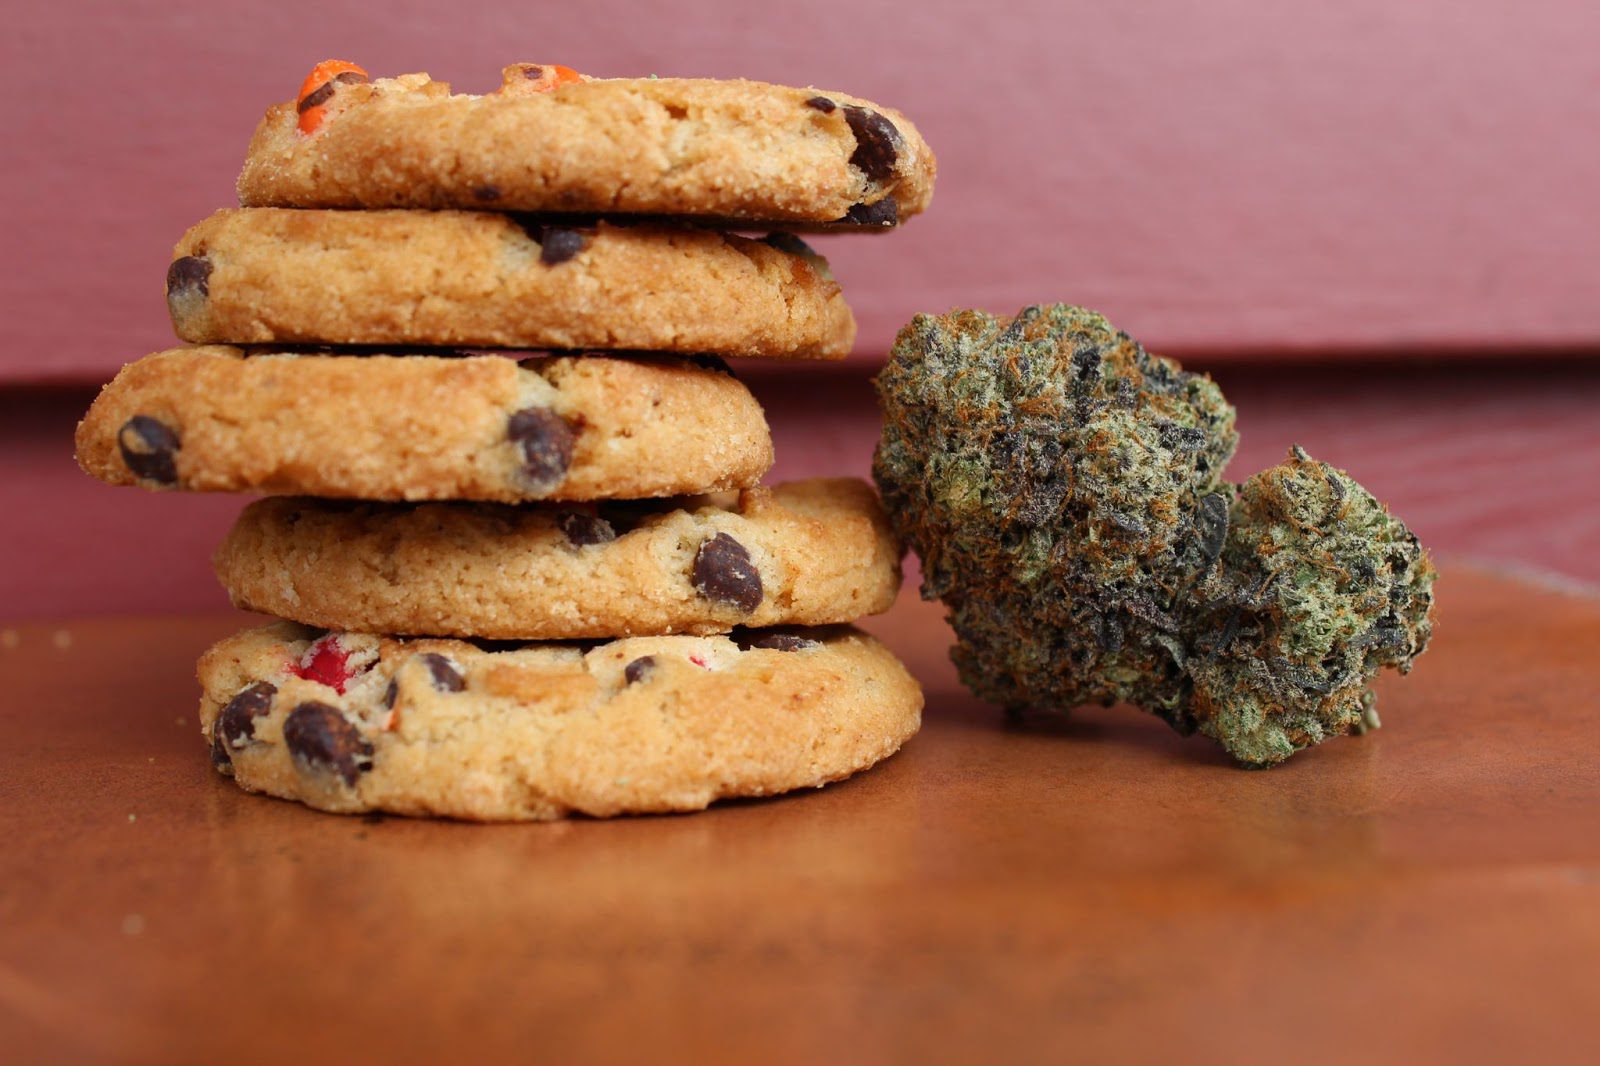 How to Make Edibles Without Cooking